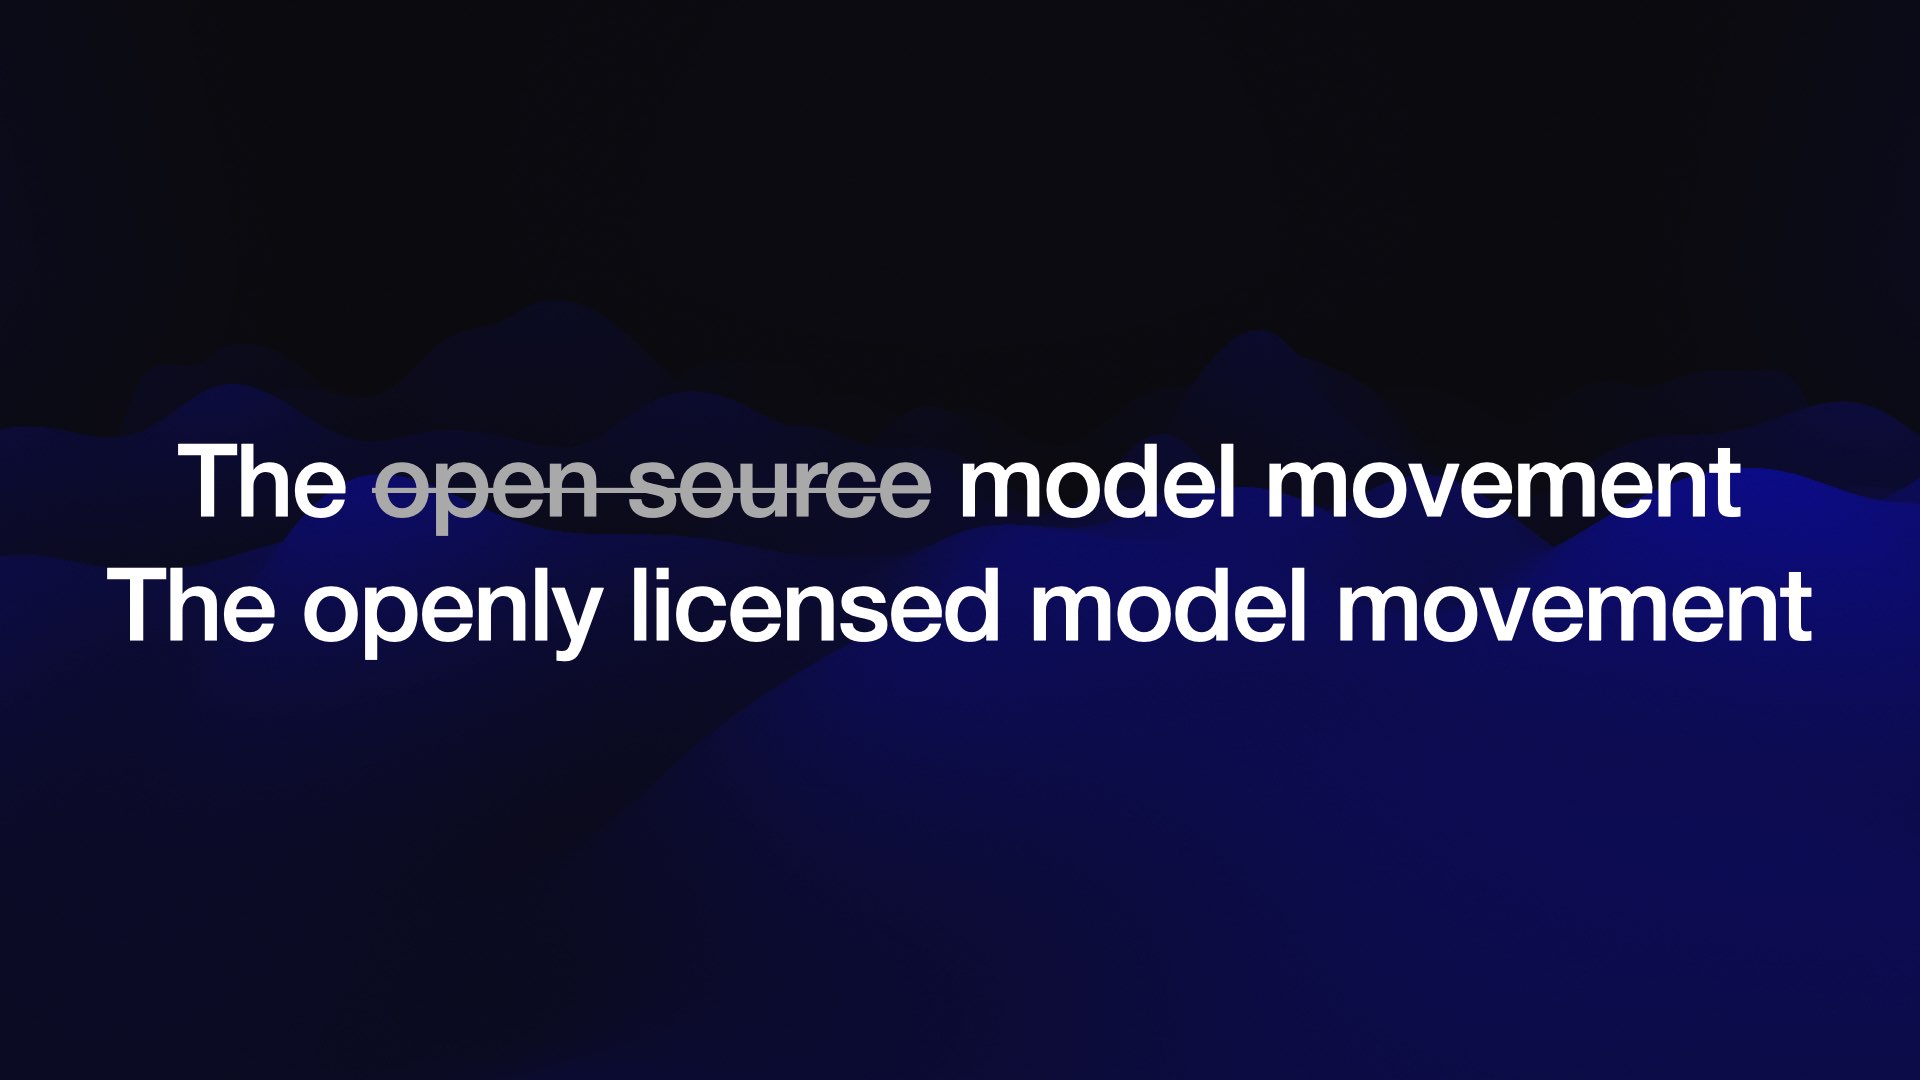 Crossed out the open source model movement   Replaced it with the openly licensed model movement 